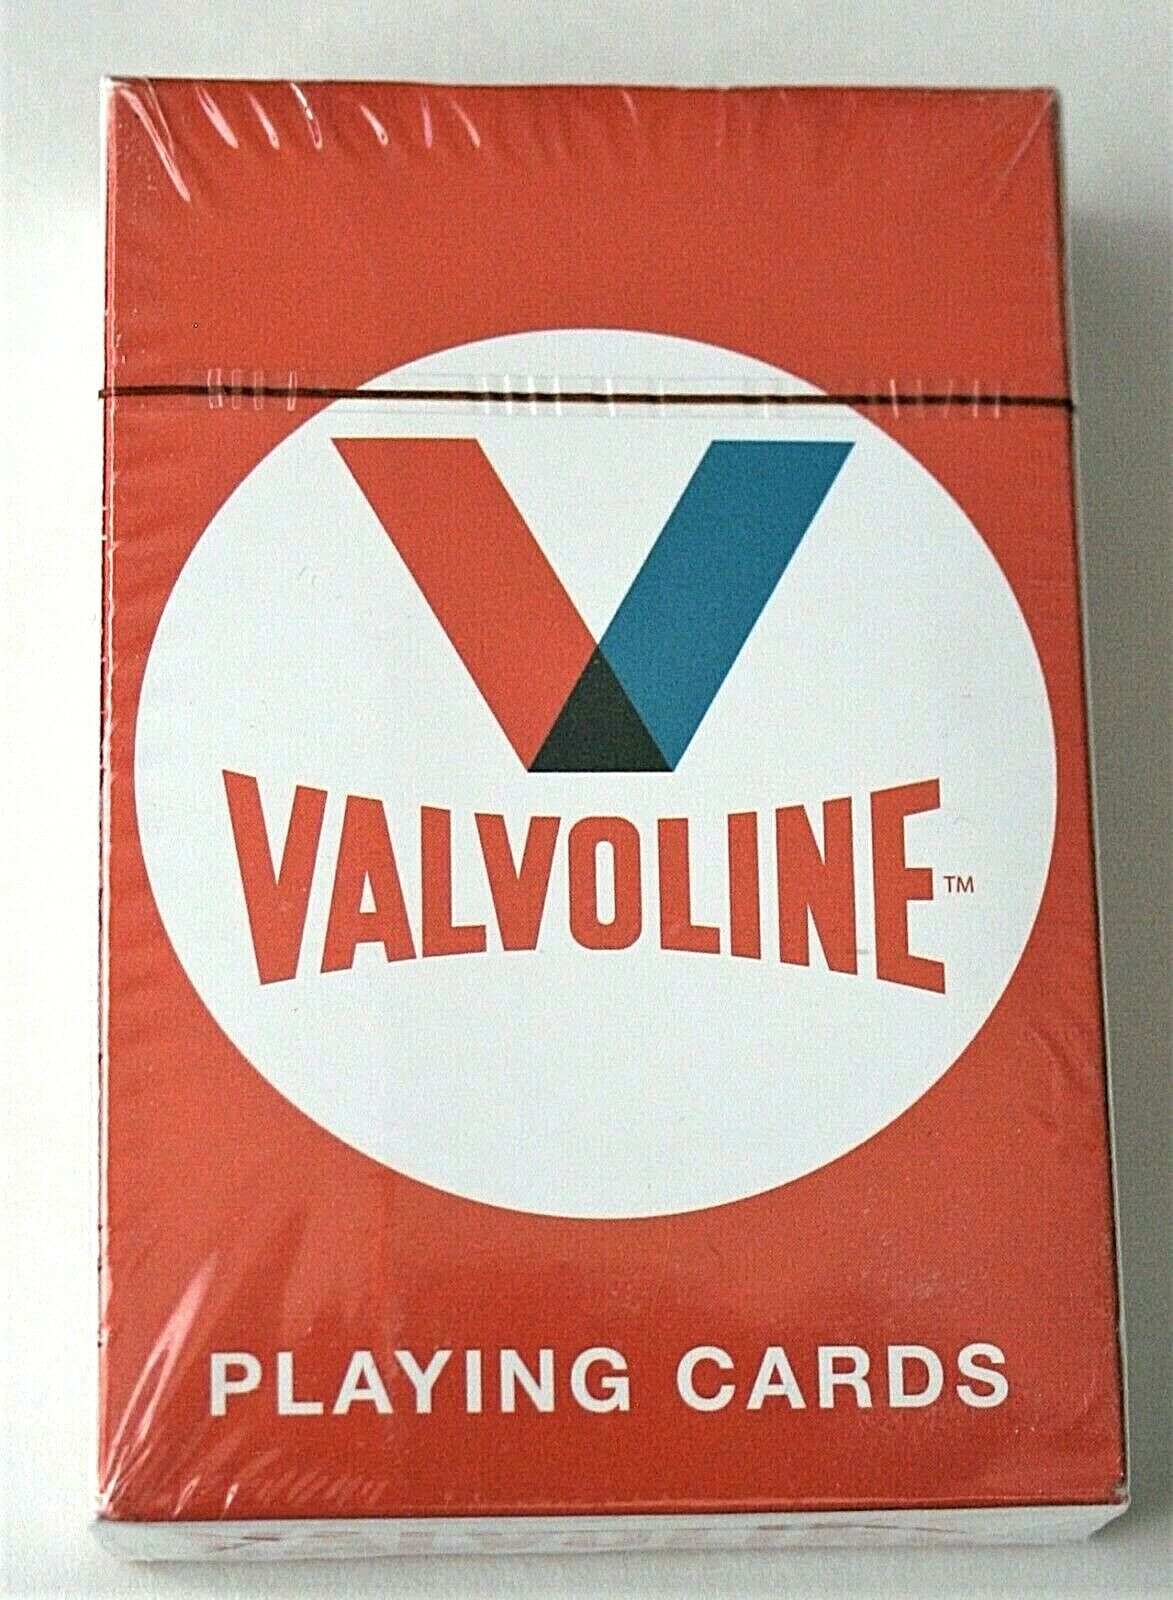 Valvoline Motor Oil Racing Deck Of Playing Cards New Sealed in Box